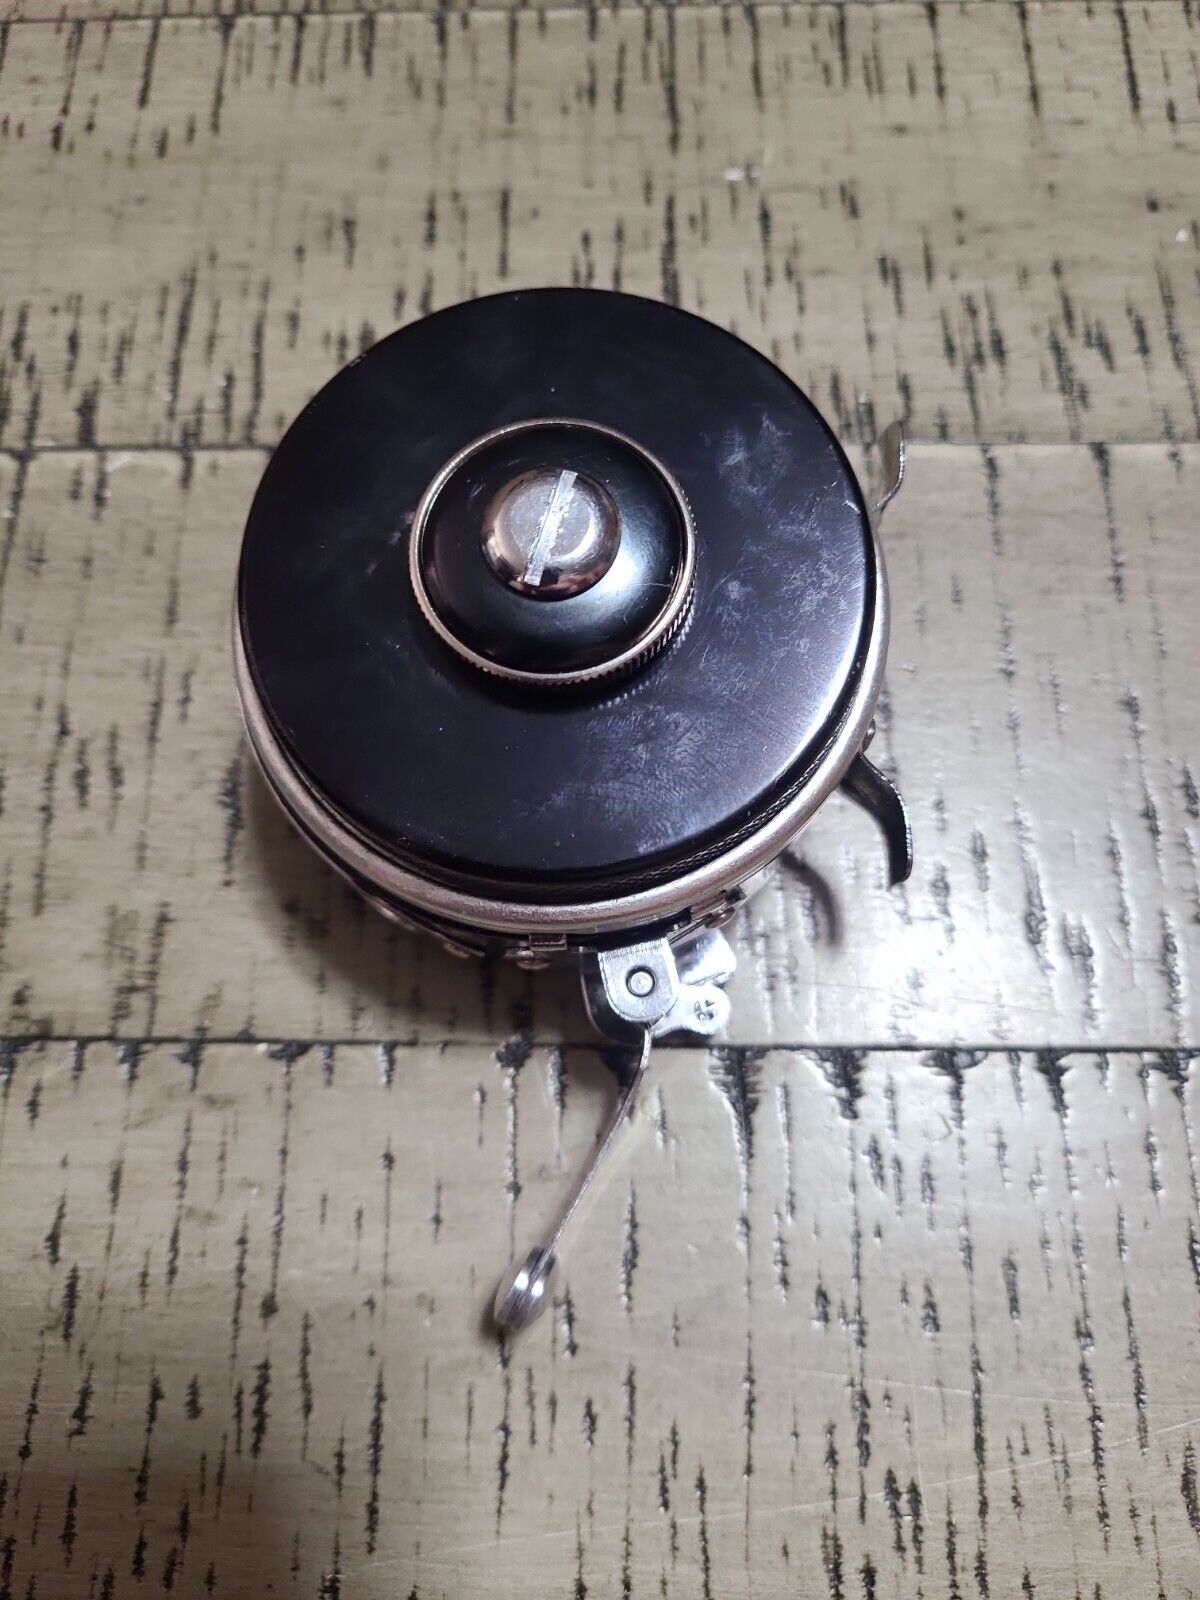 SHAKESPEARE OMNI 55, AUTOMATIC FLY FISHING Reel Vintage